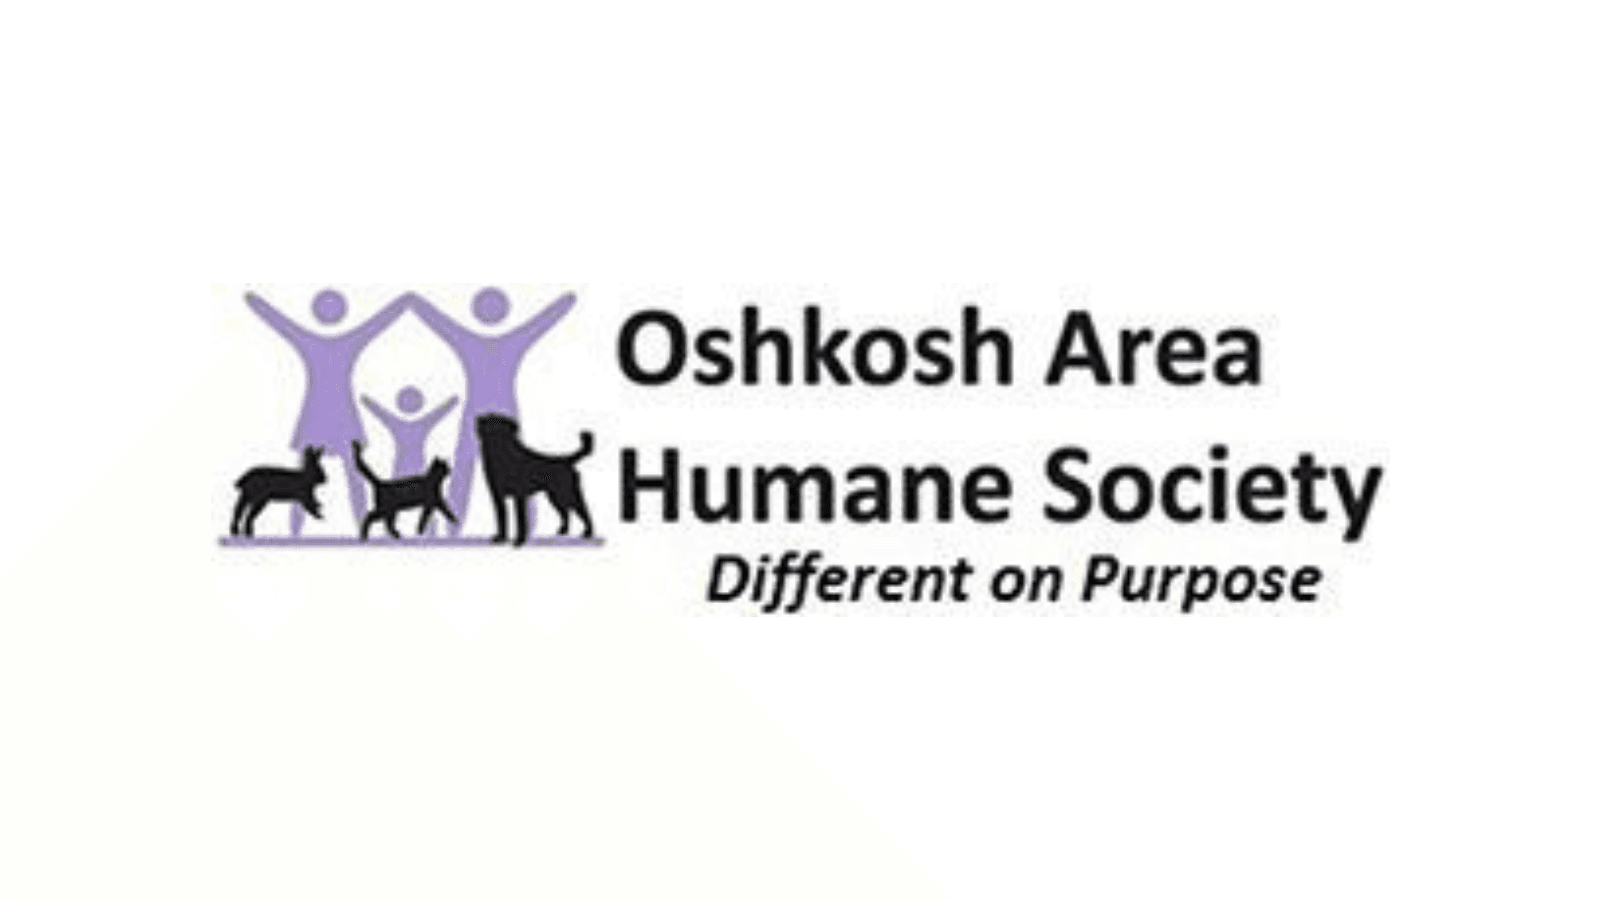 OAHS urgently seeks adopters to clear out the shelter